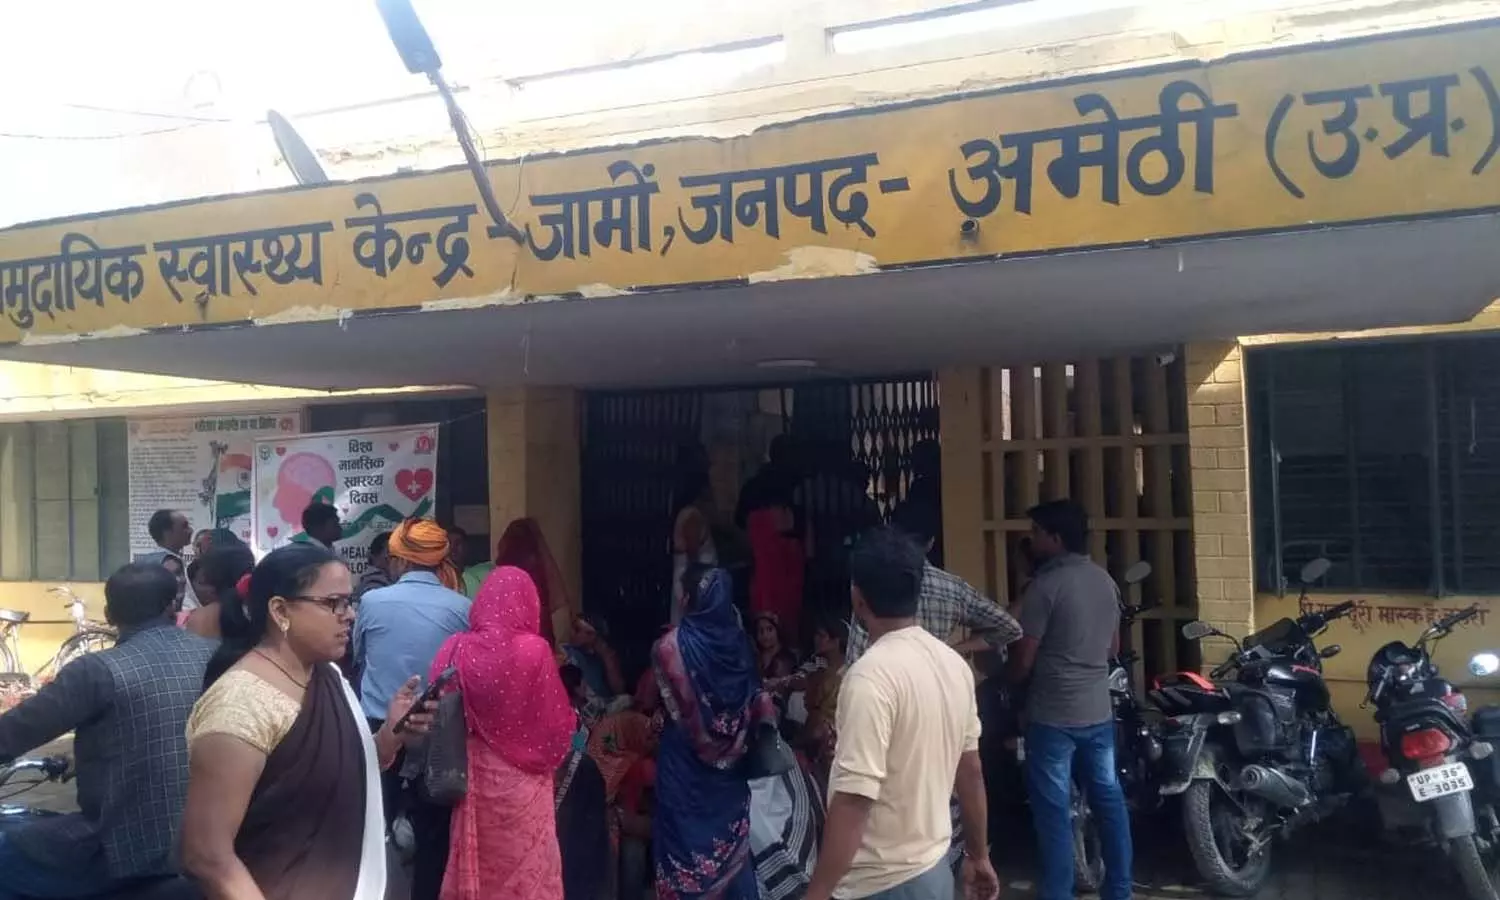 In Amethi, ASHA workers closed the main gate of the CHC during the demonstration, locked the superintendents room